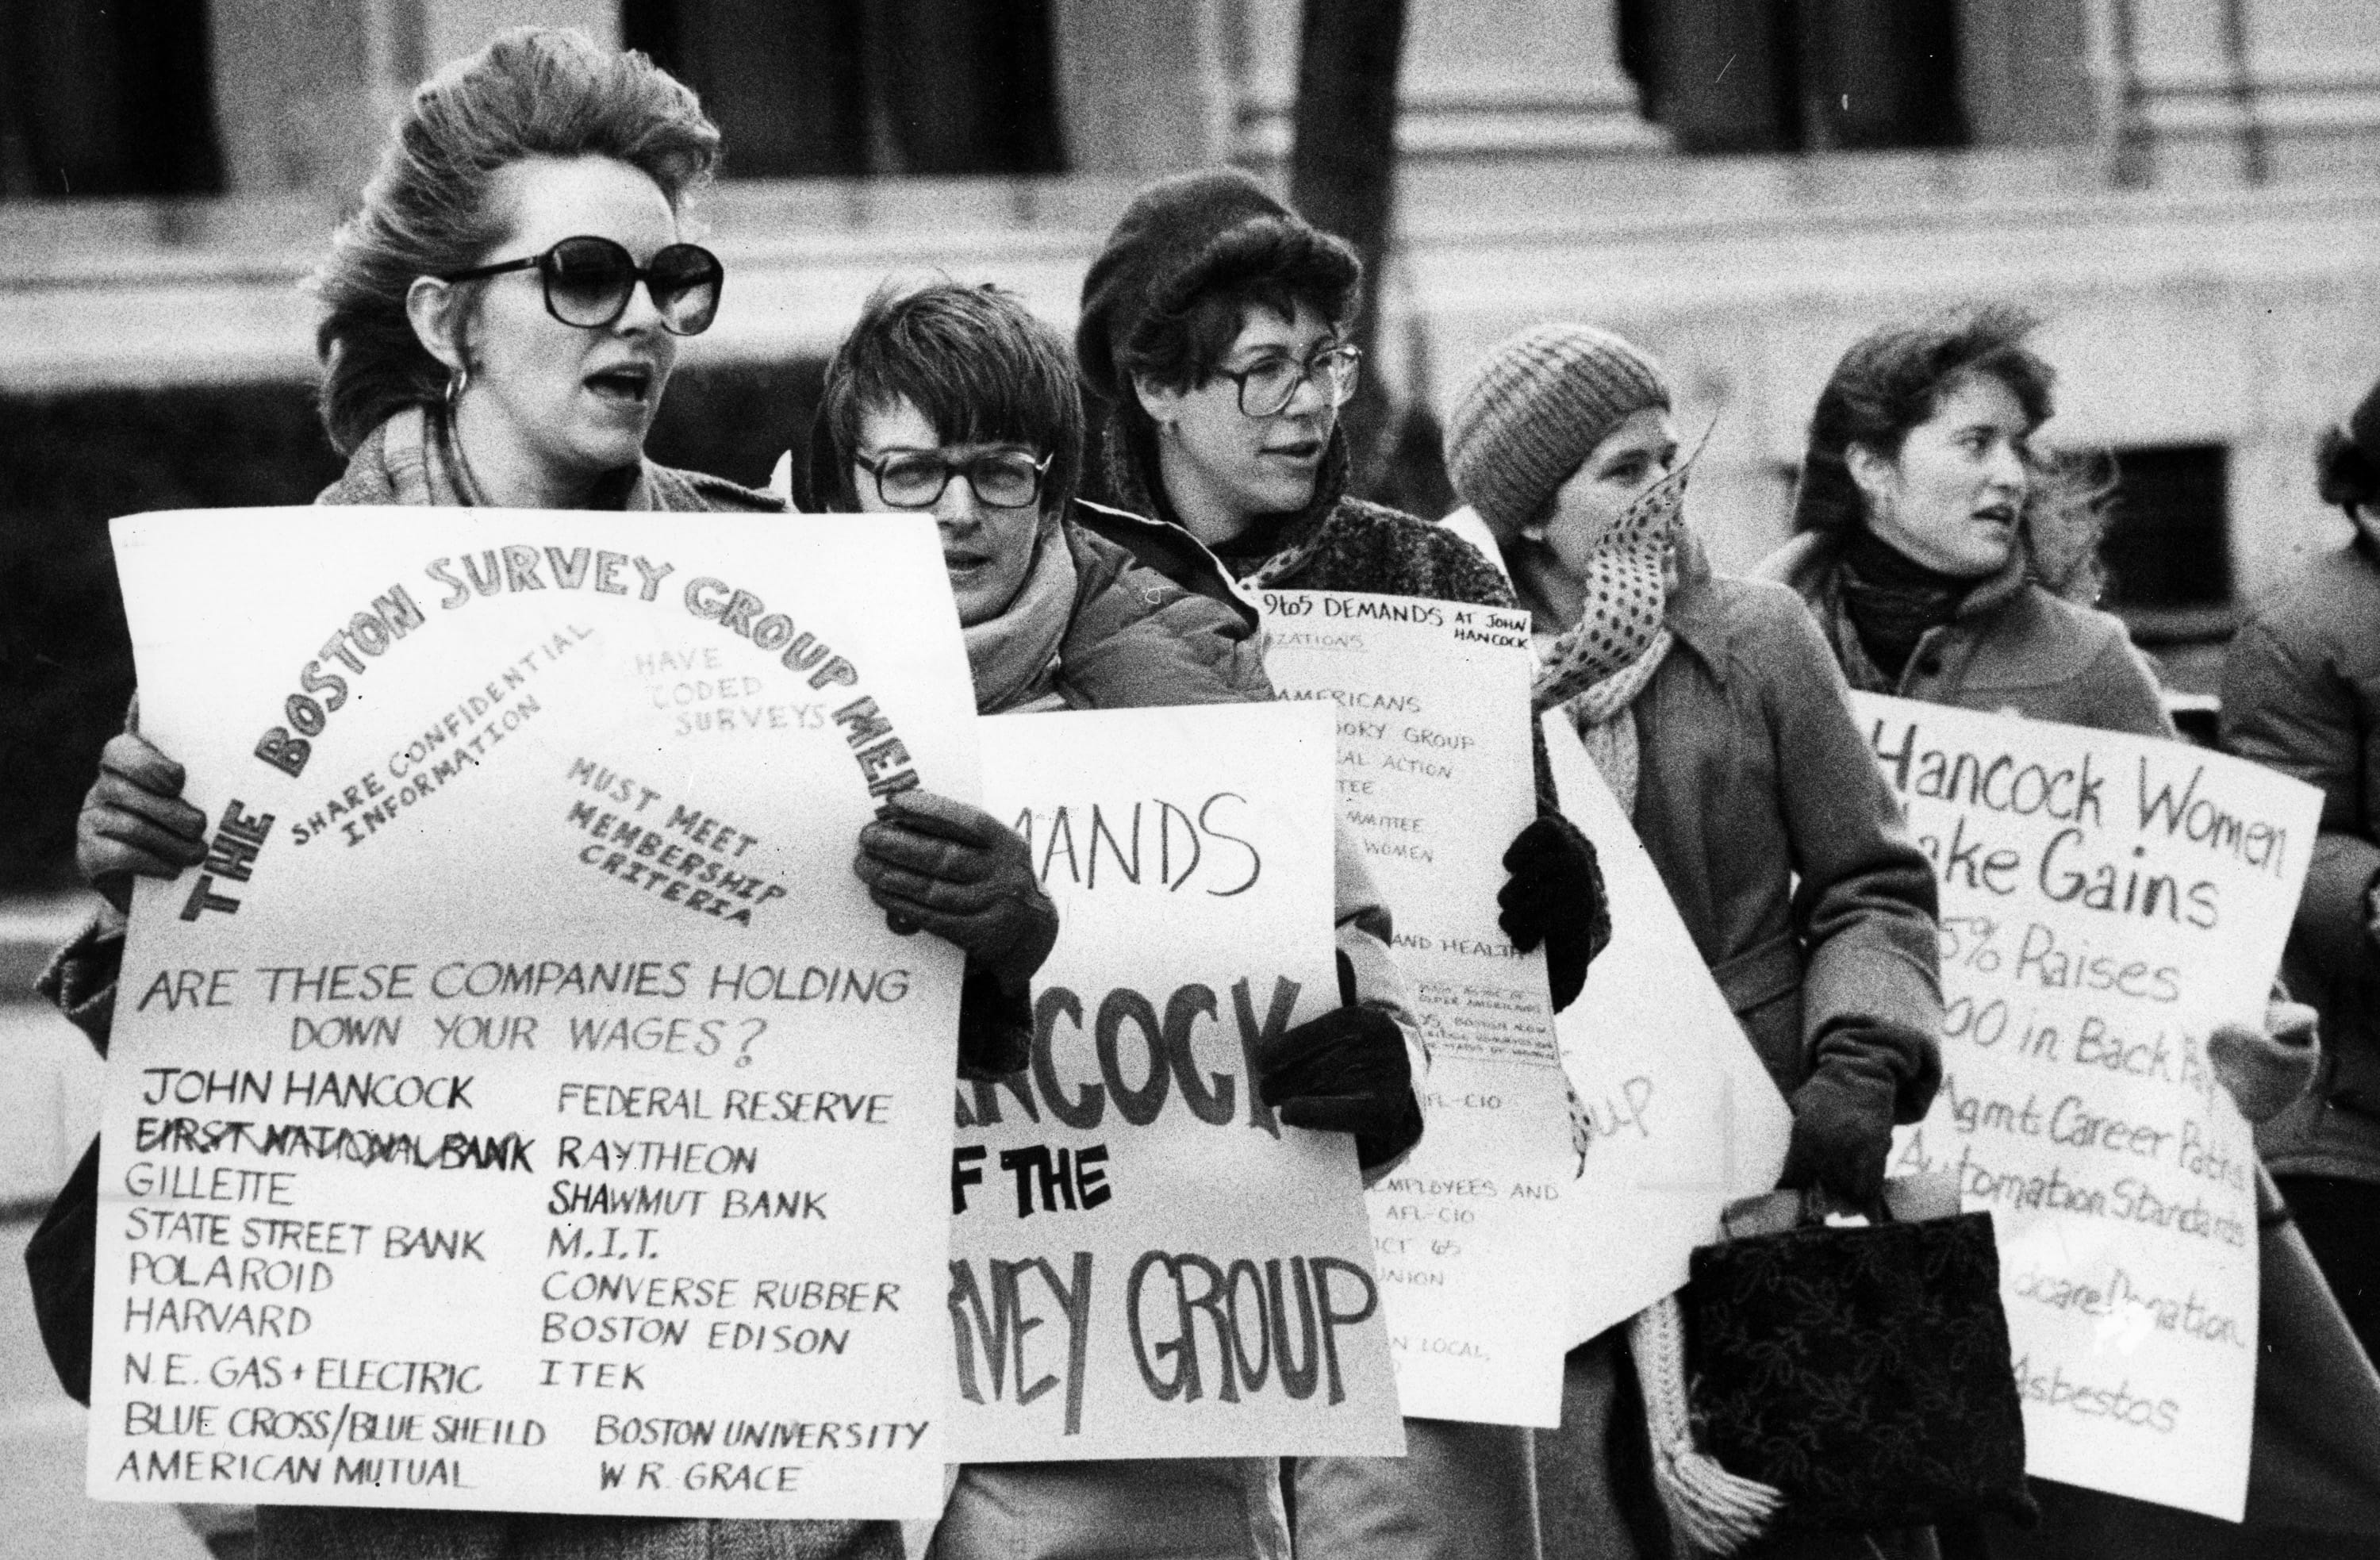 A black and white photo of women protesting outside holding handmade protest signs.